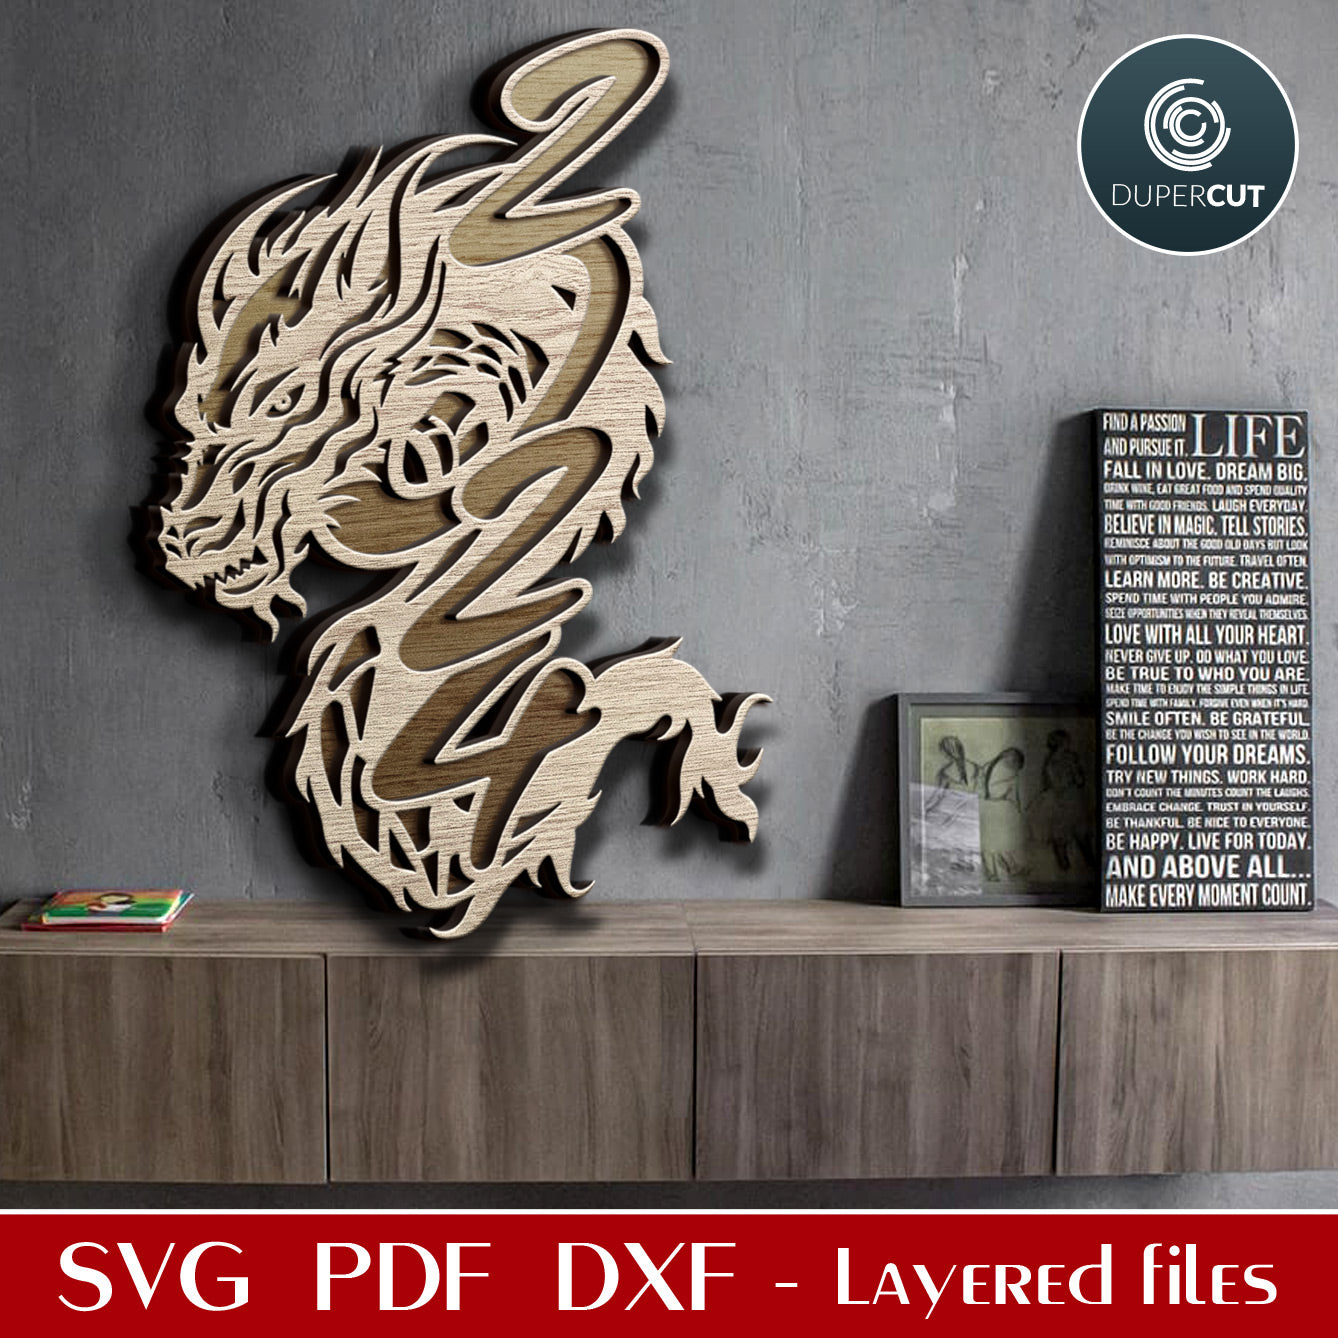 Chinese horoscope year of the Dragon - SVG DXF layered cut template for Glowforge, Cricut, Xtool, laser cutting machines by www.DuperCut.com